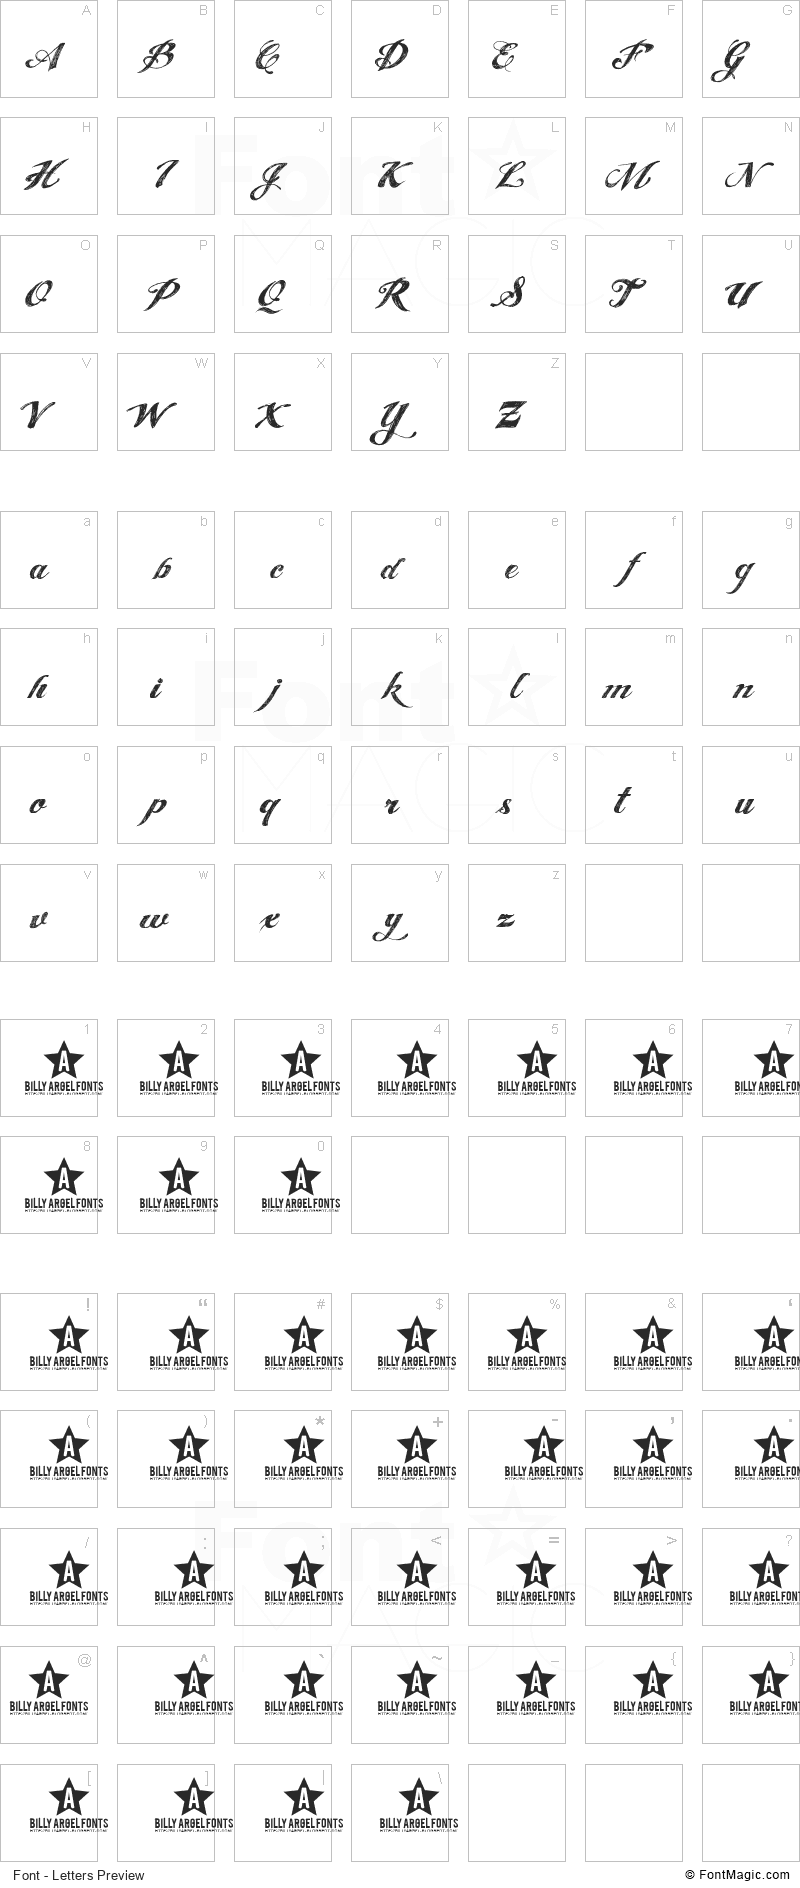 Angel Tears Font - All Latters Preview Chart